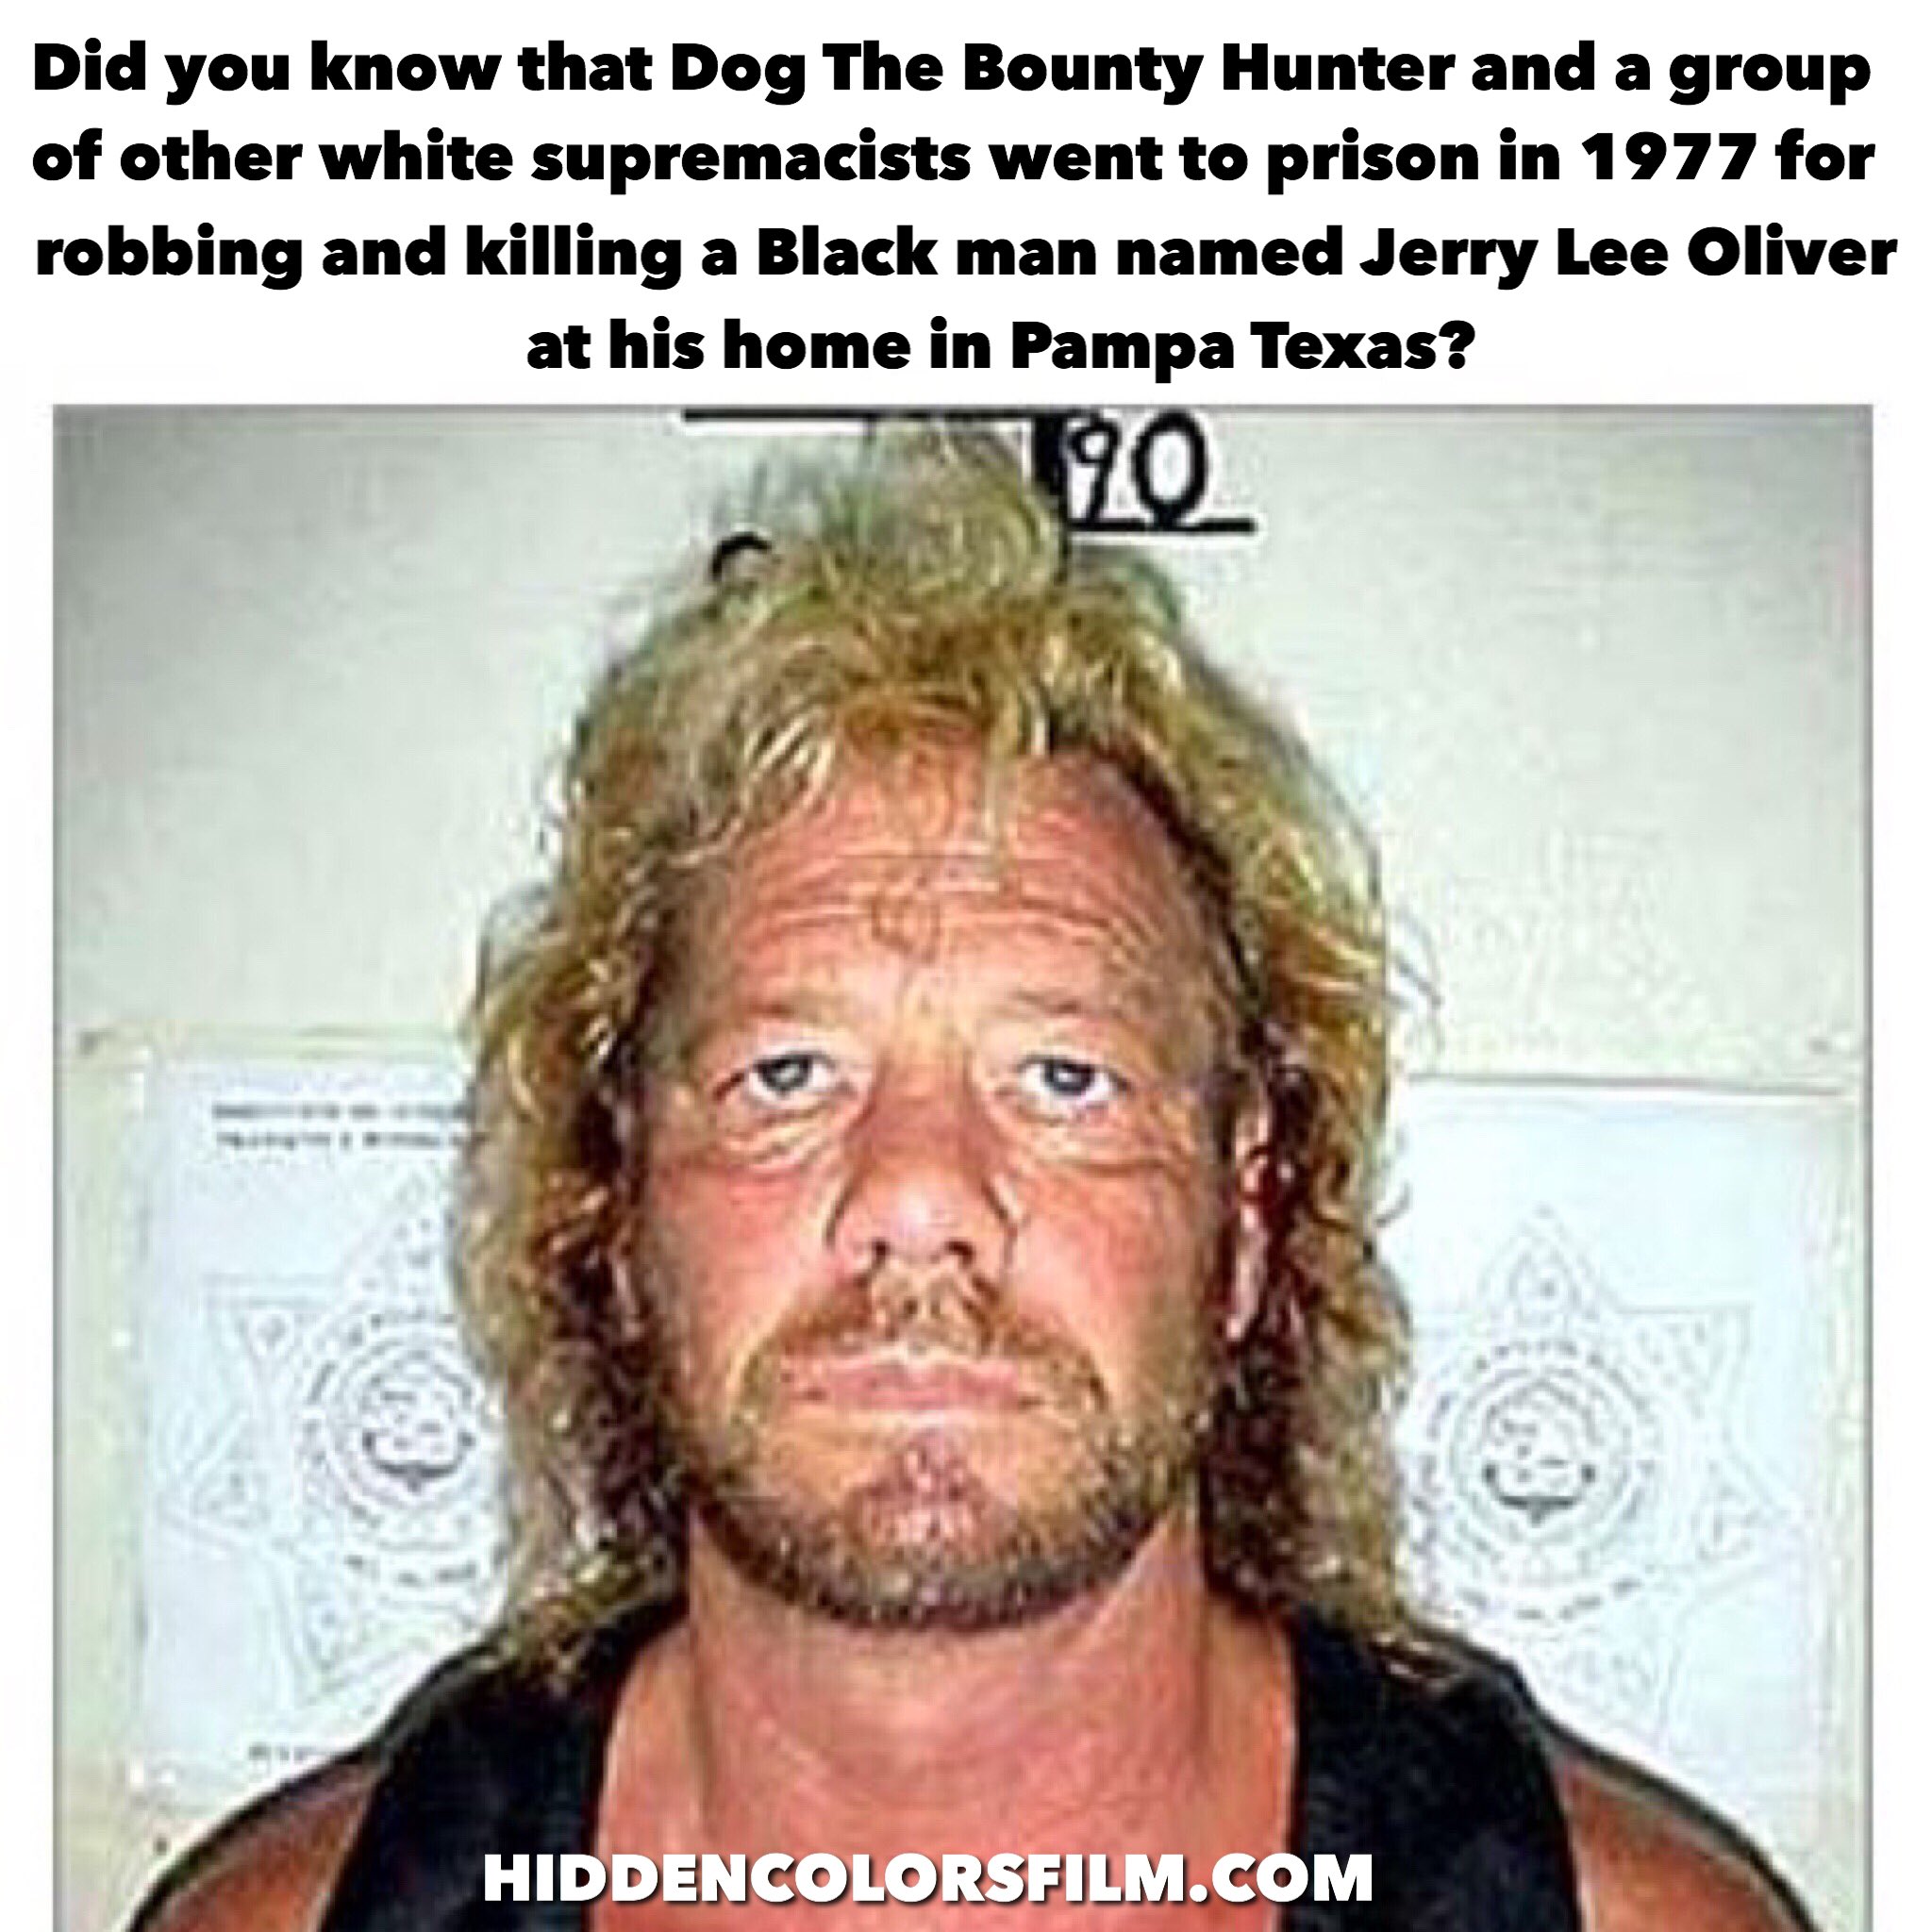 did dog the bounty hunter go to jail in 1977